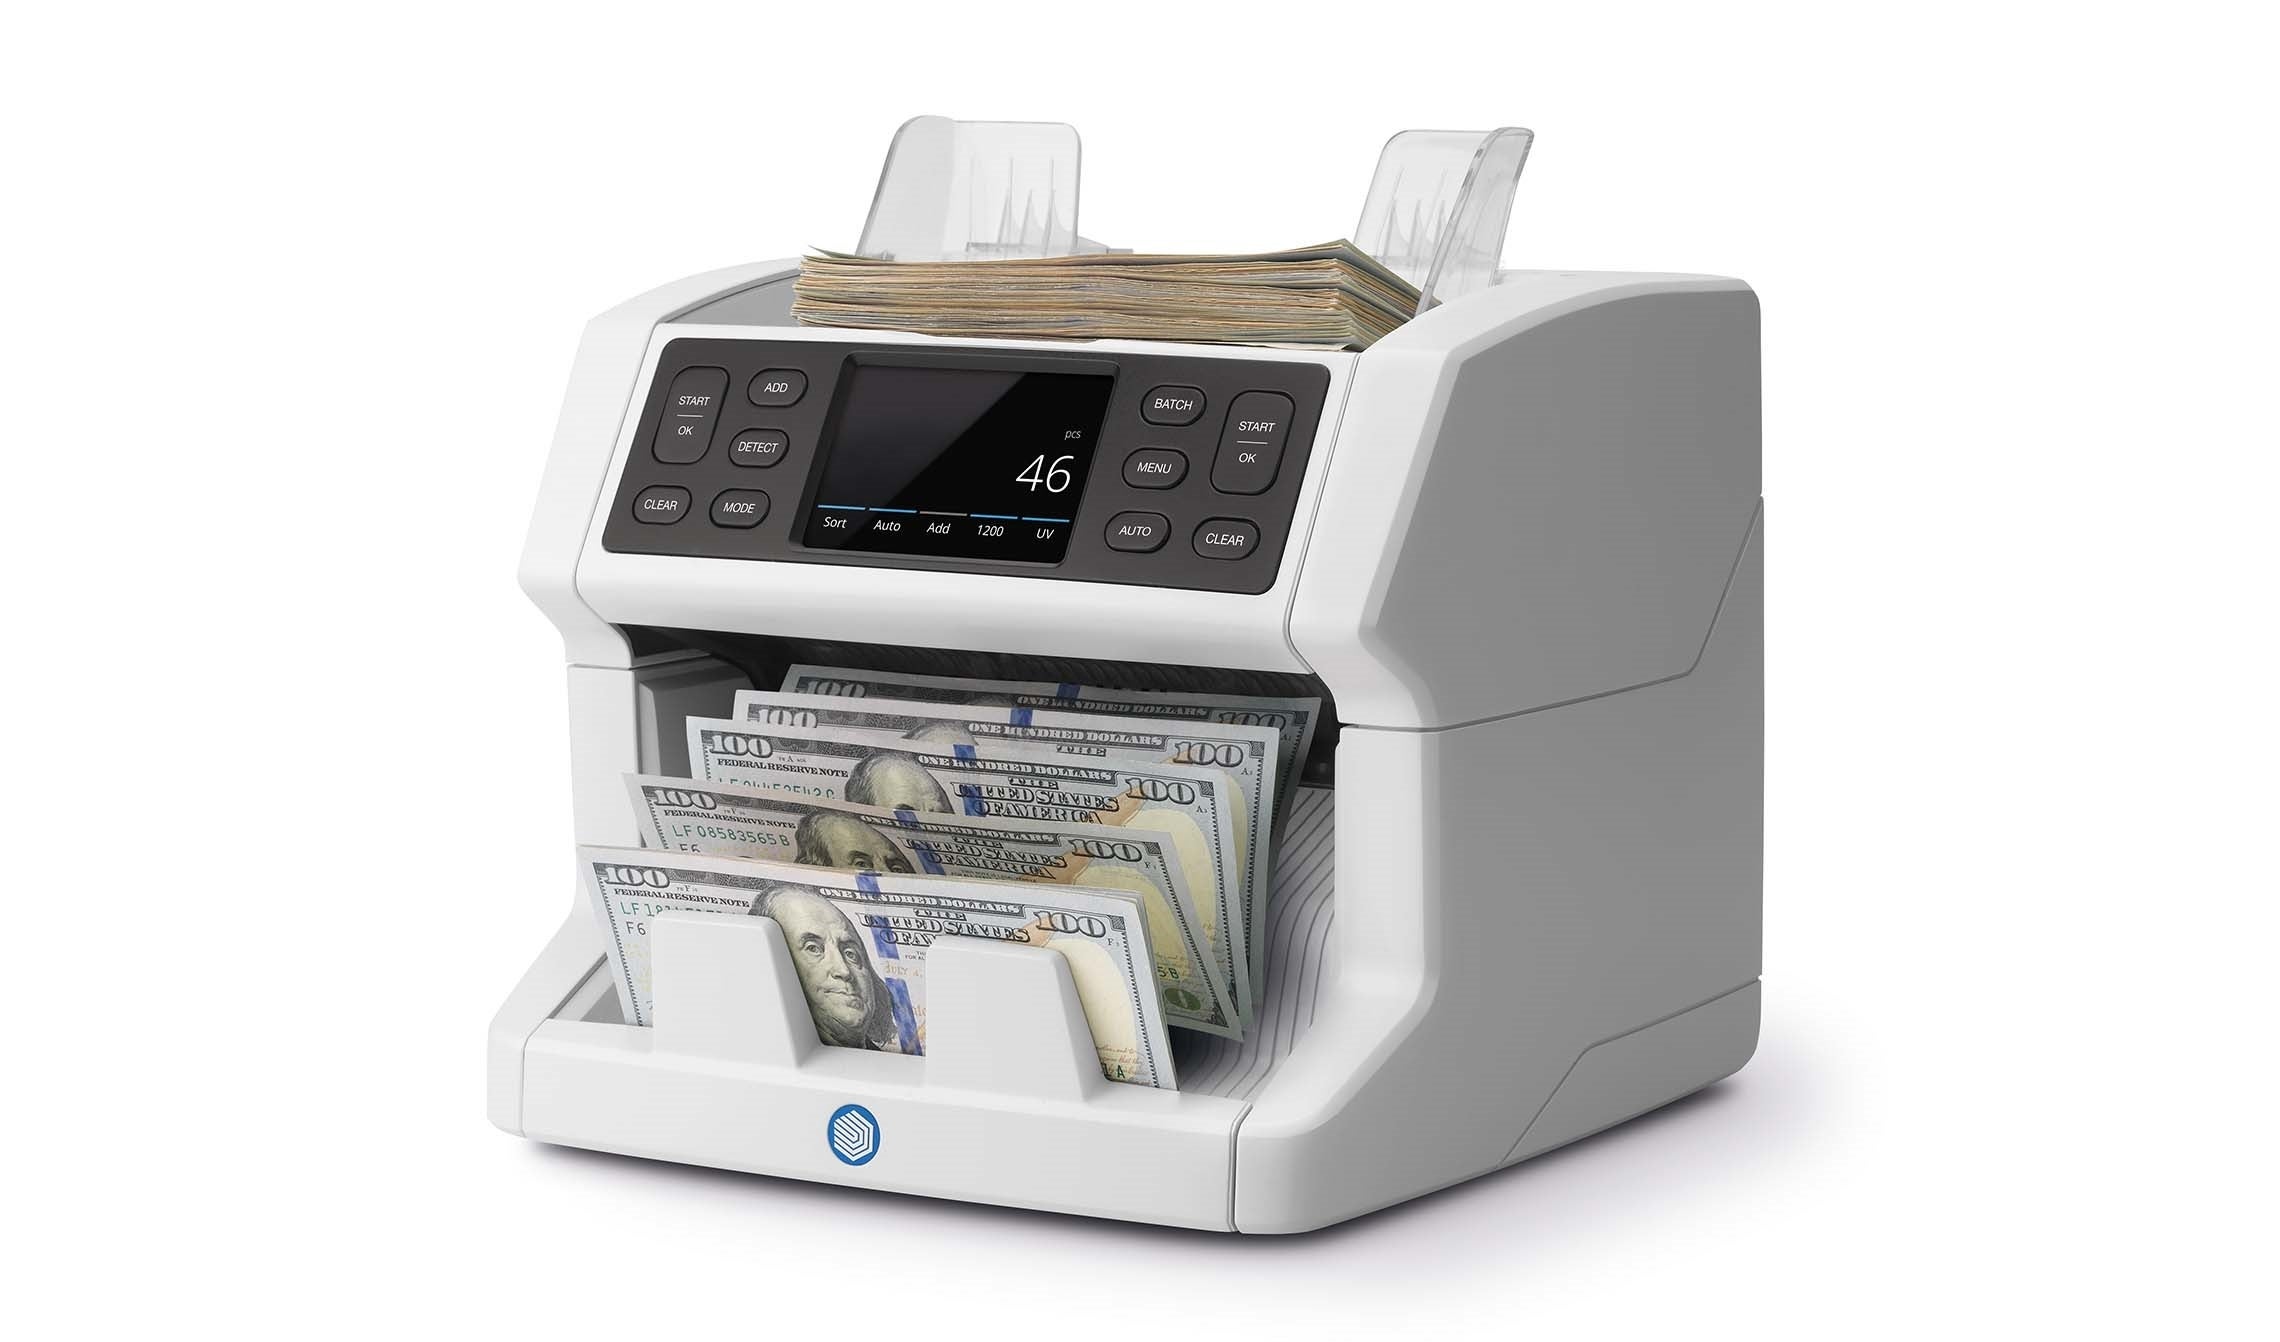 Canada Euro LBSX Money Counter Worldwide Bill Counting Machine Detector UV/MG Counterfeit w/External Display Support Countries Such As US Dollar Japan Money Handling Products British Pound Etc 